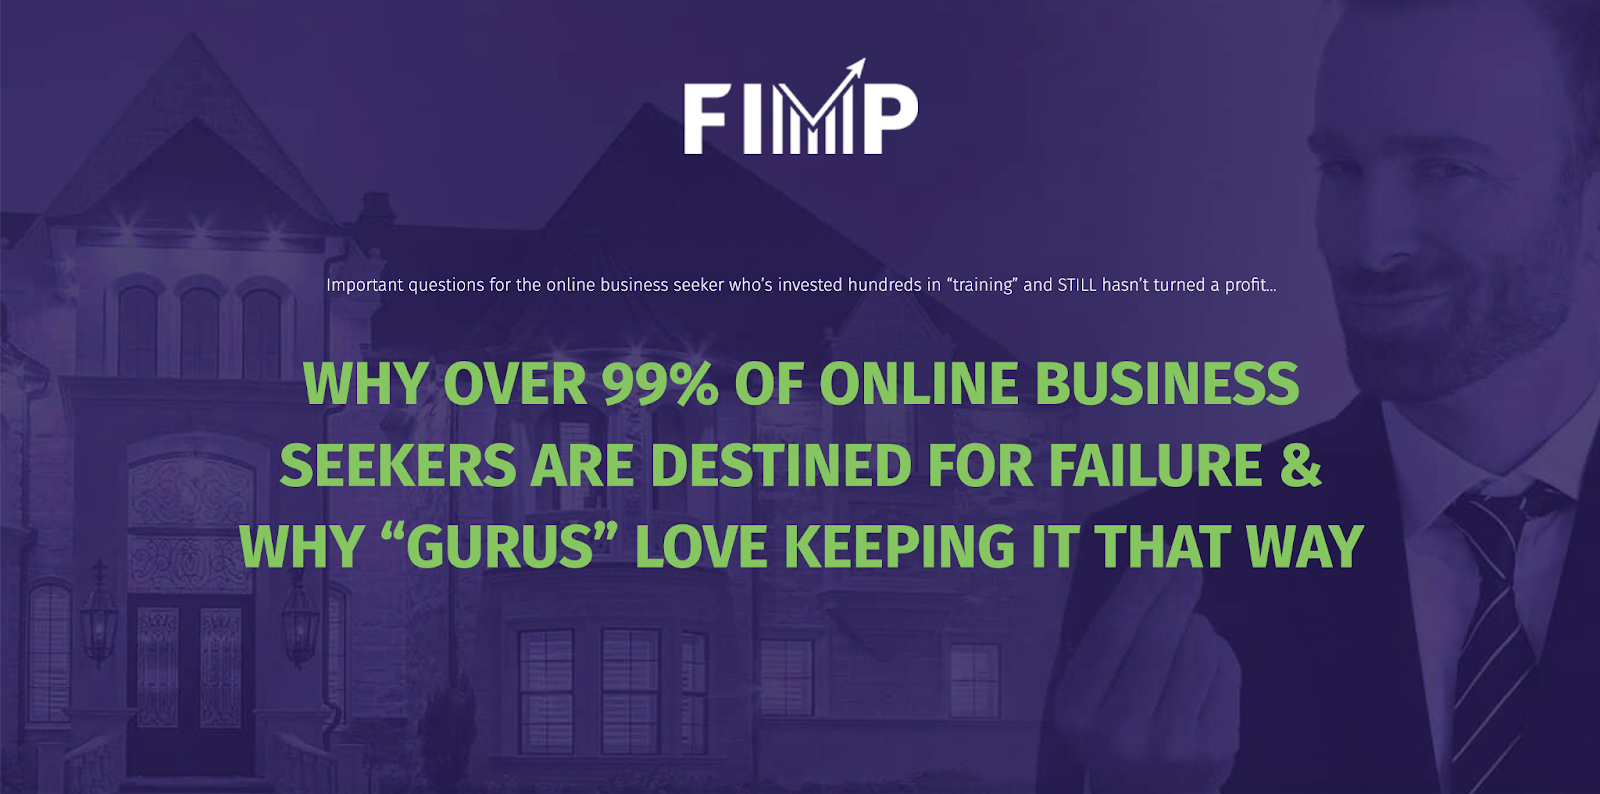 The homepage of FIMP that state that '99% of online business seekers are destined for failure and why 'gurus' love keeping it that way'.